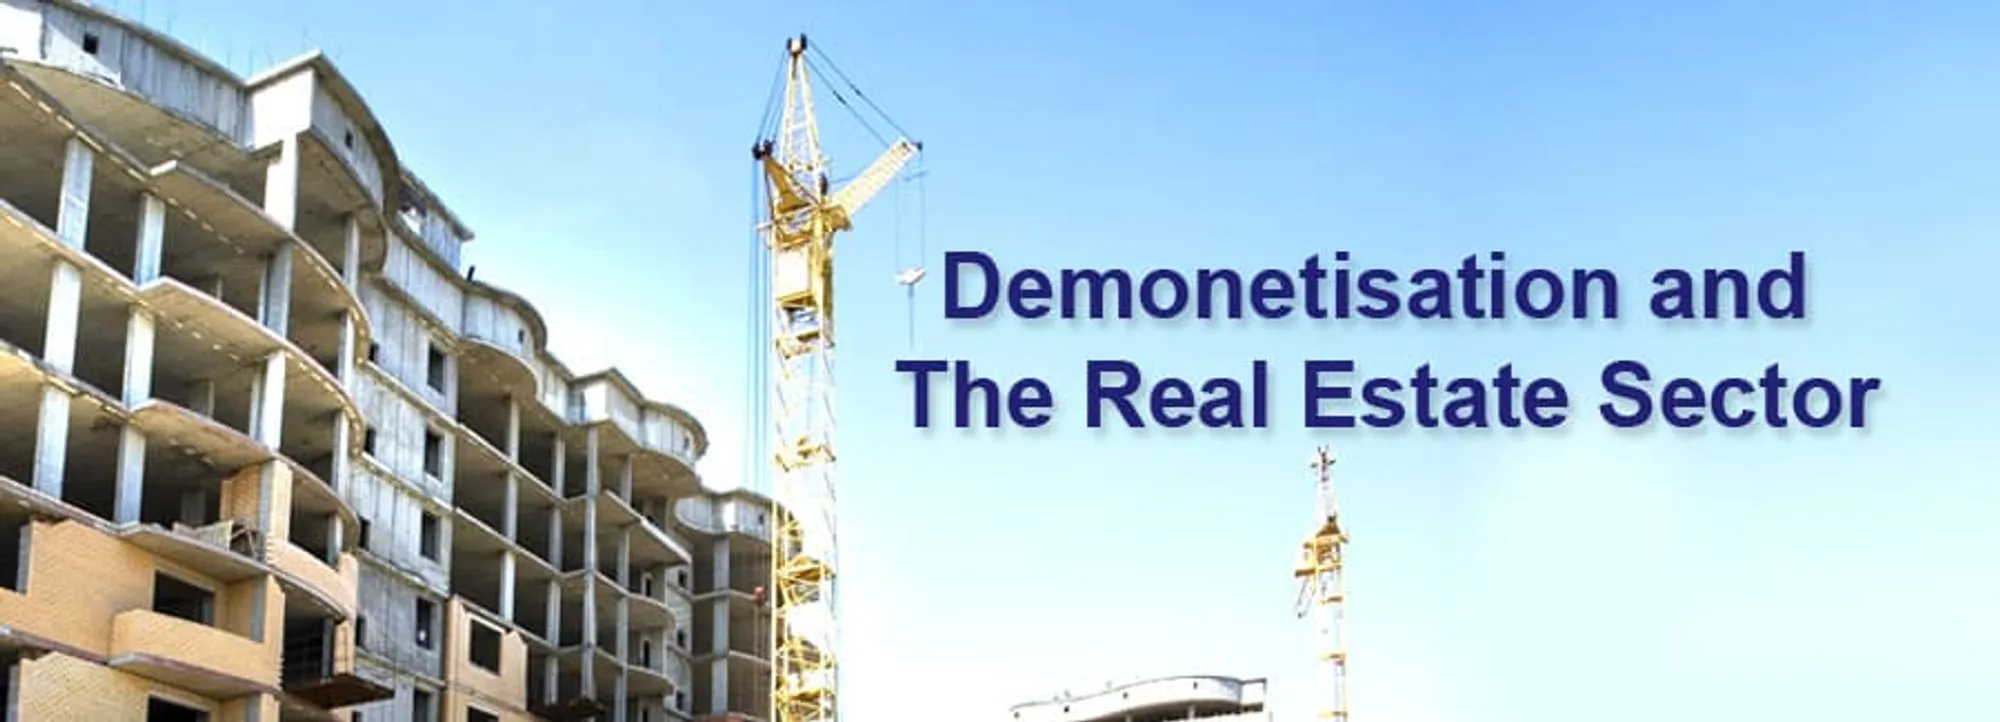 Demonetisation and The Real Estate Sector